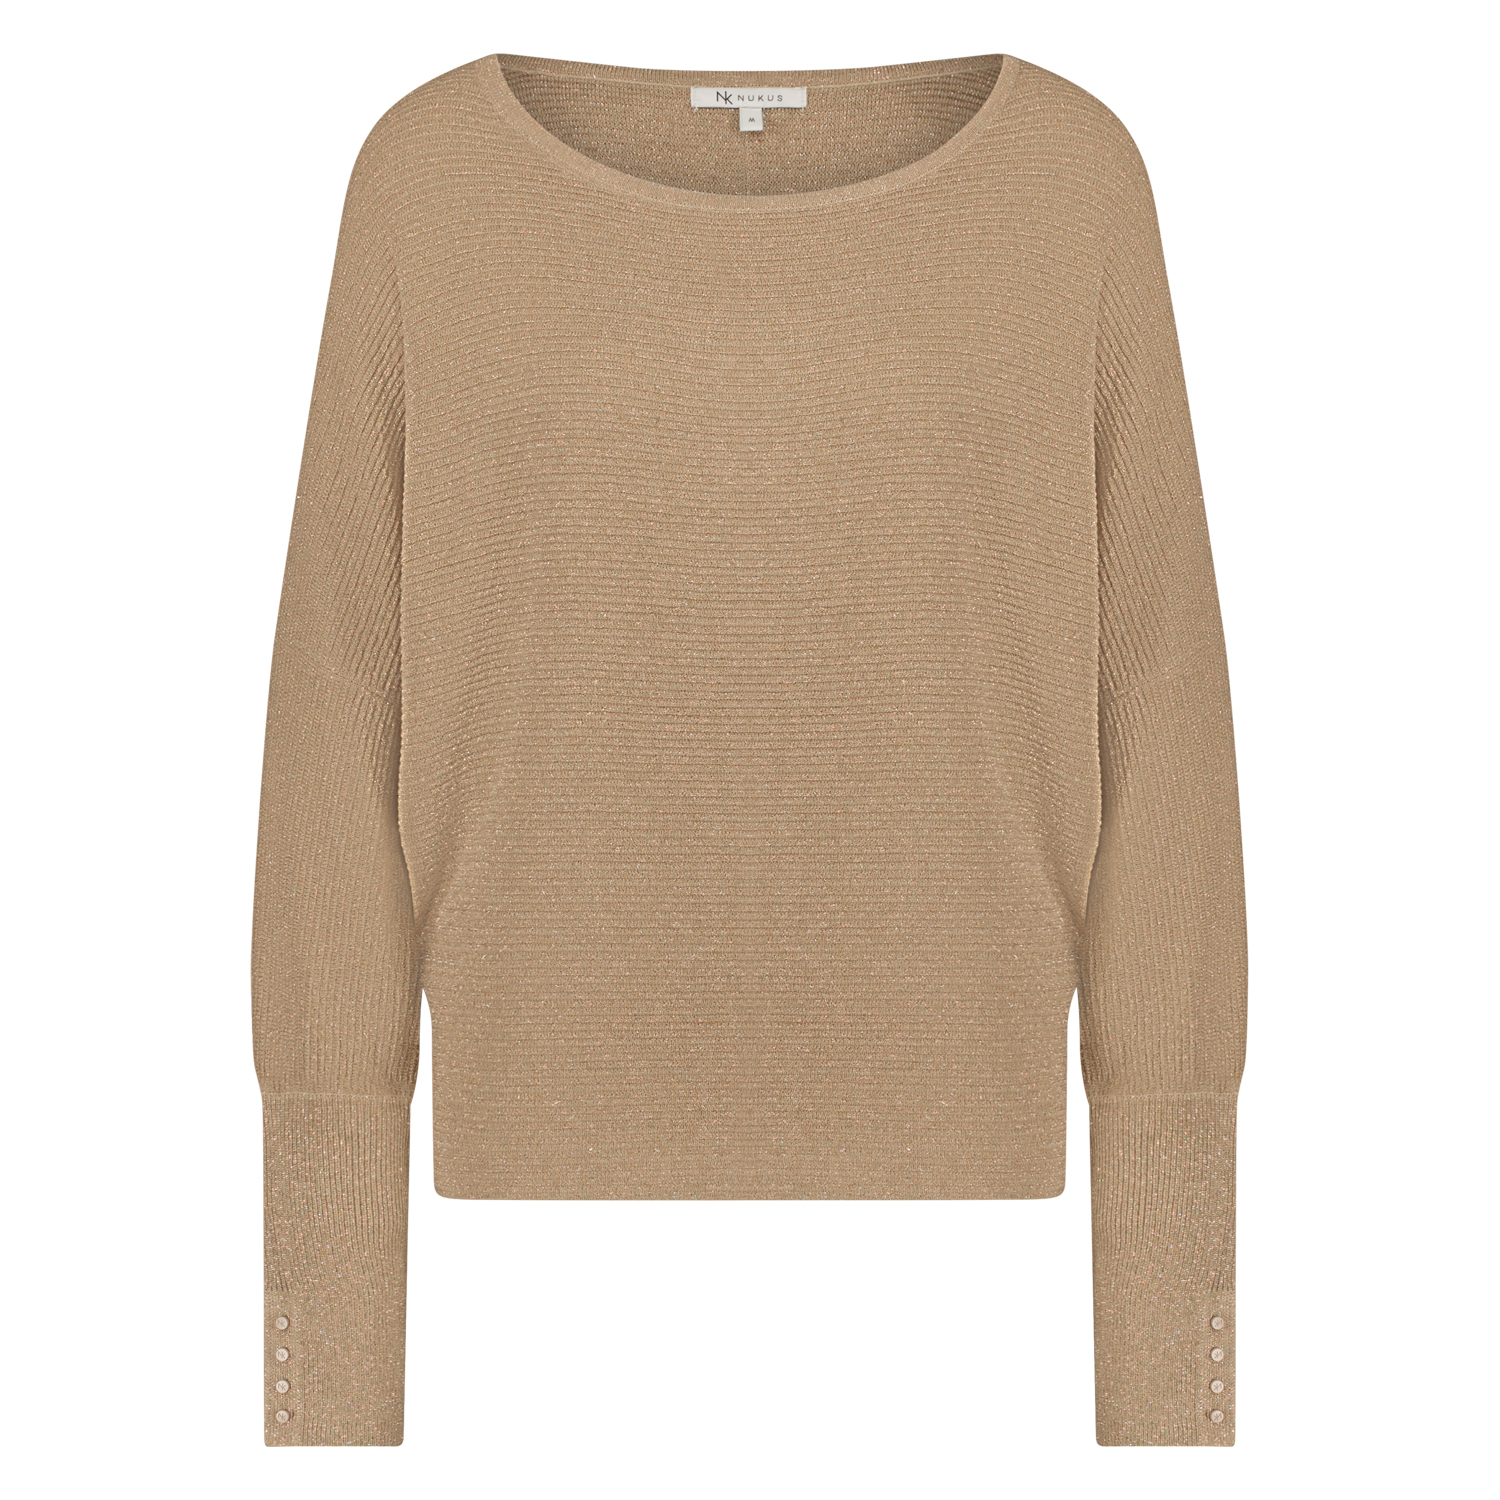 Batwing_camel_front